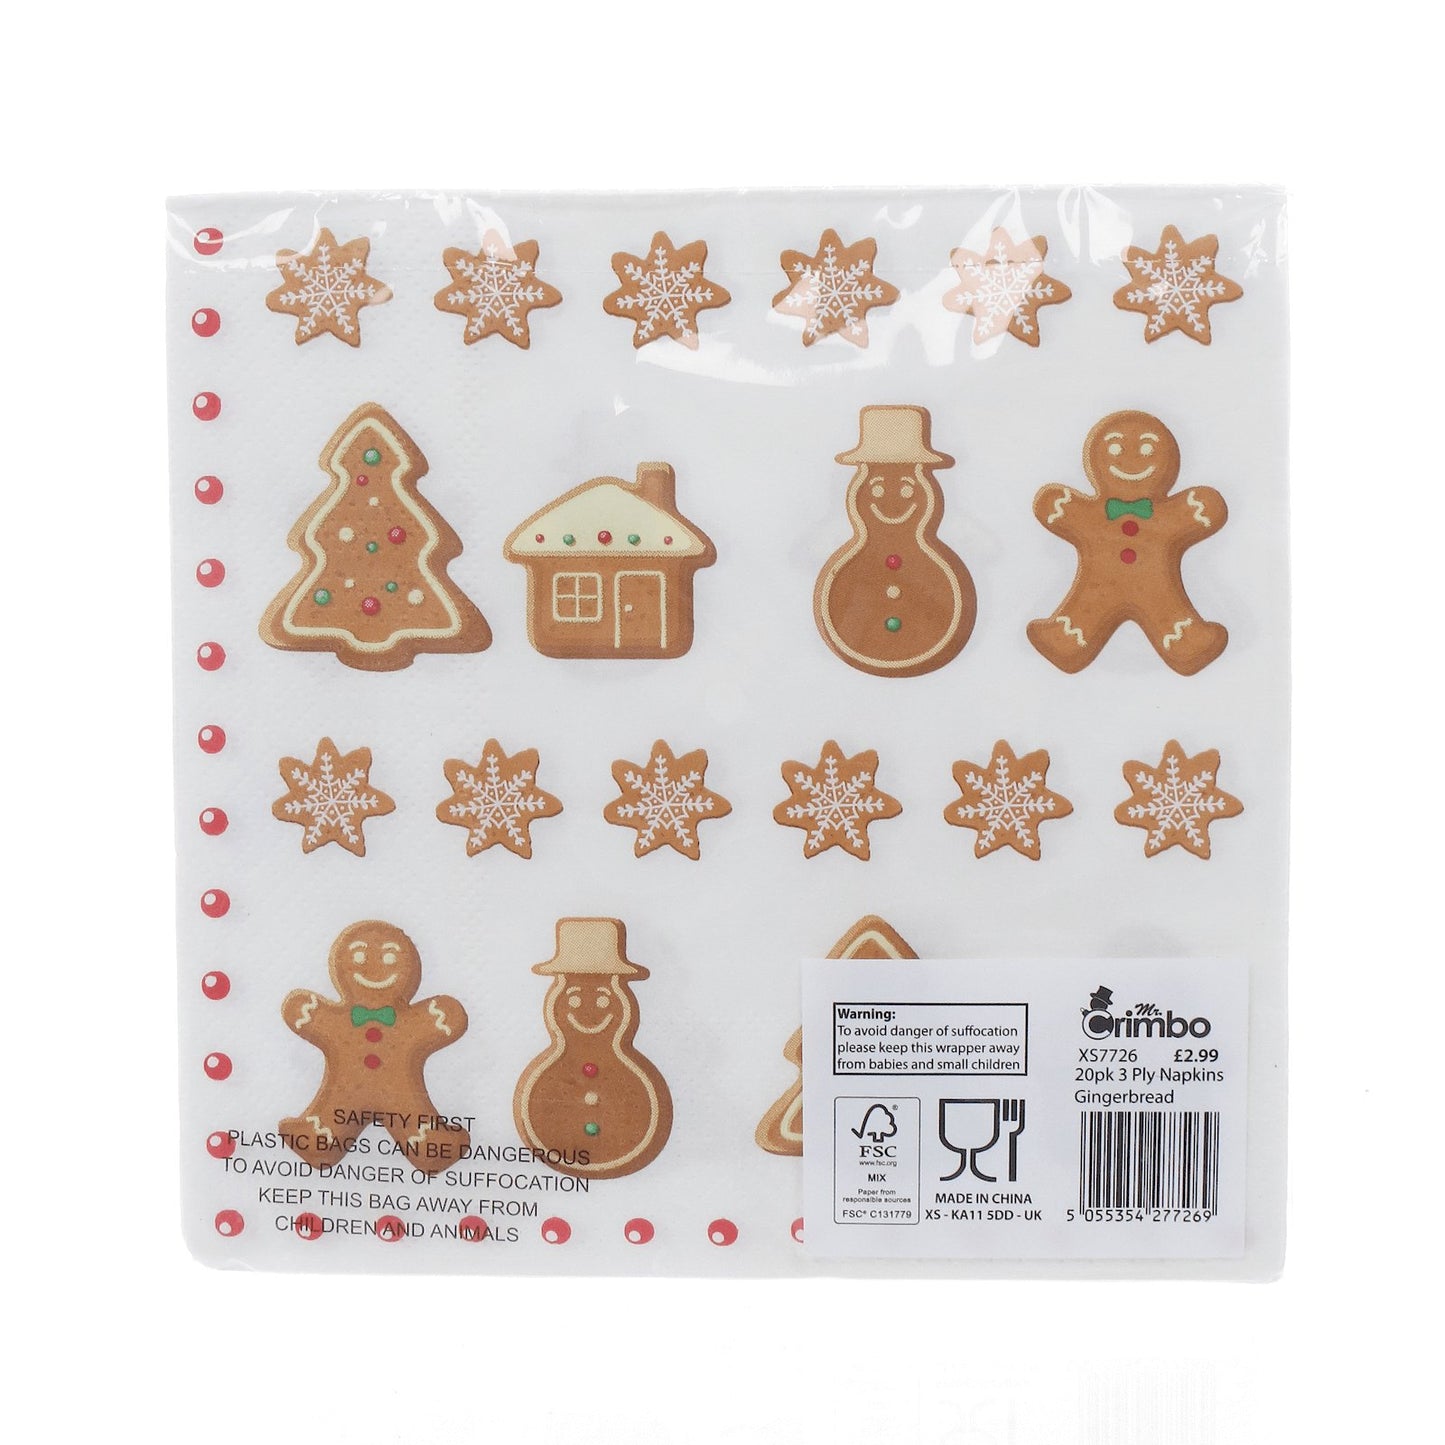 20 pack of gingerbread theme christmas napkins in cellophane packaging